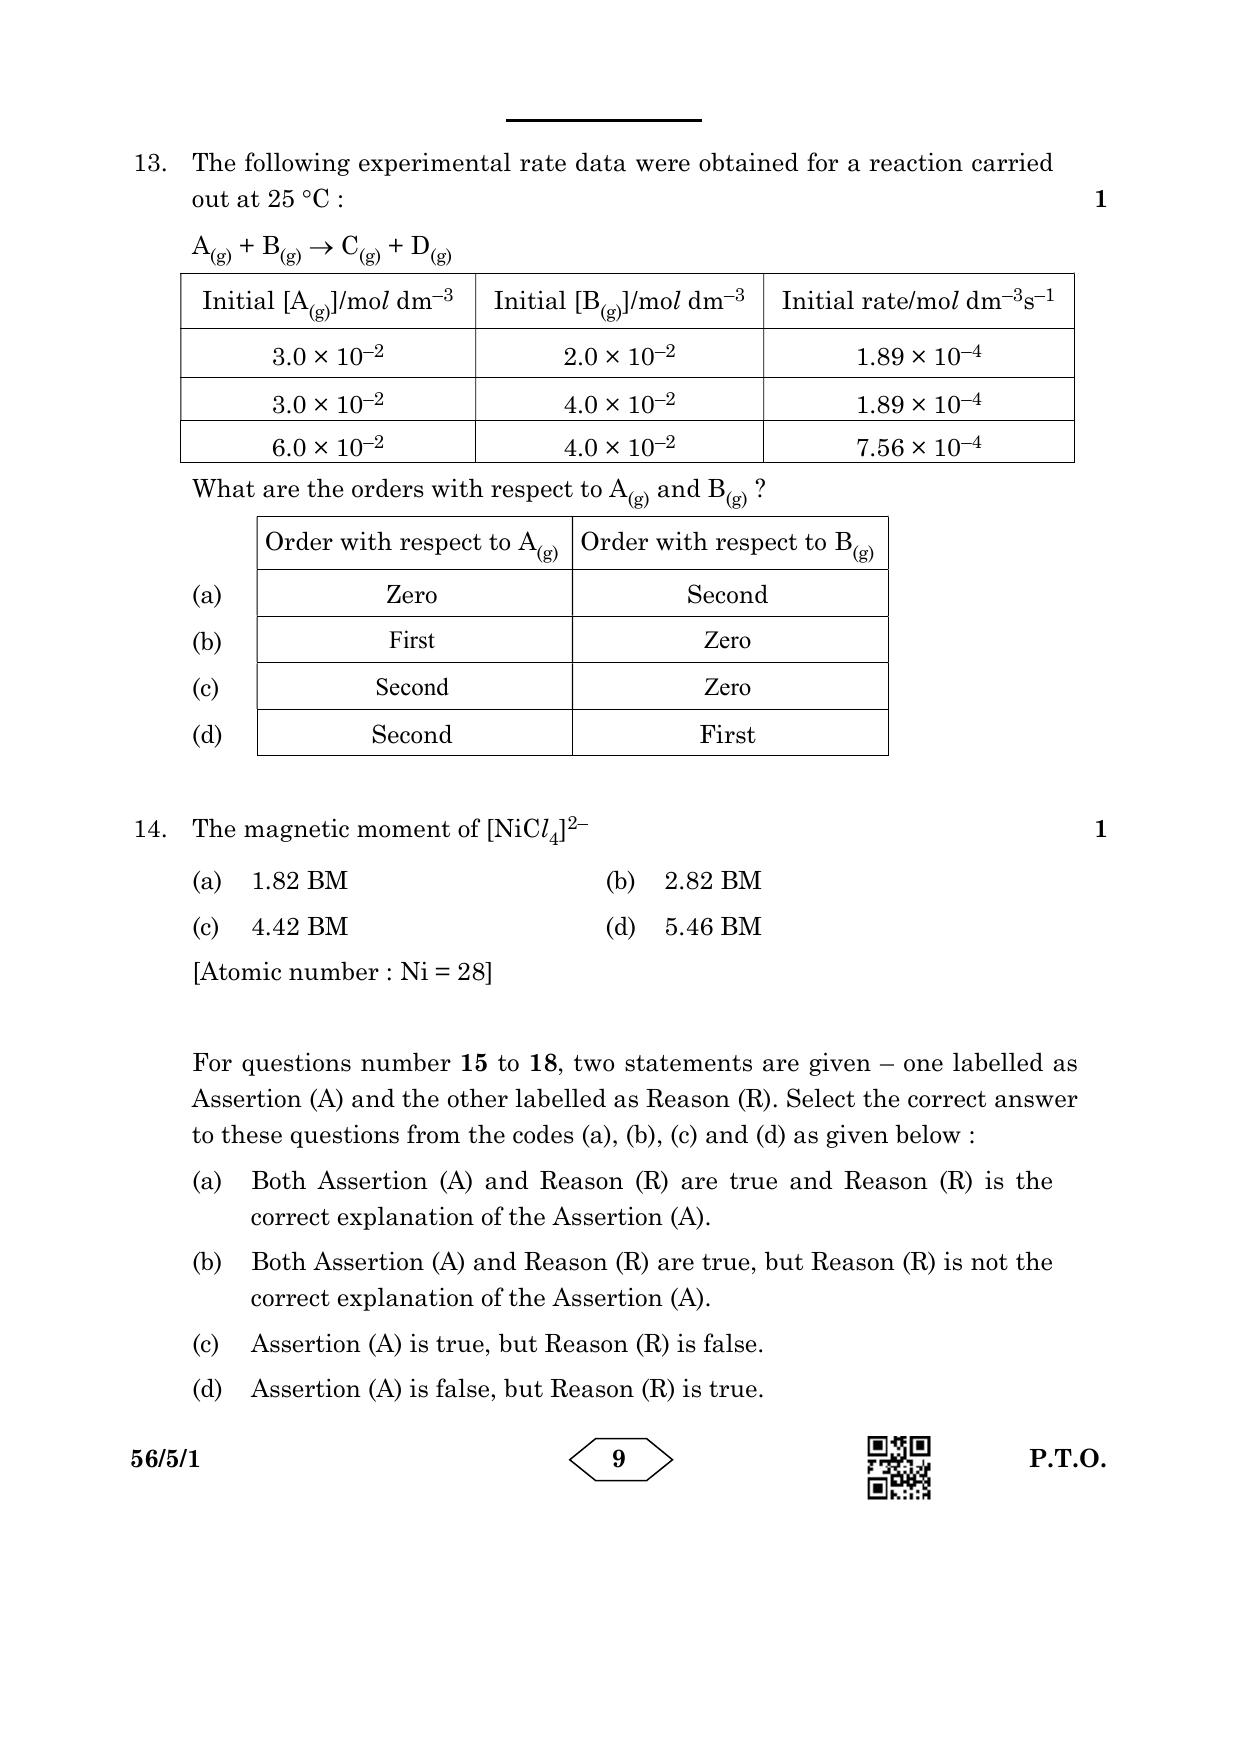 CBSE Class 12 56-5-1 Chemistry 2023 Question Paper - Page 9